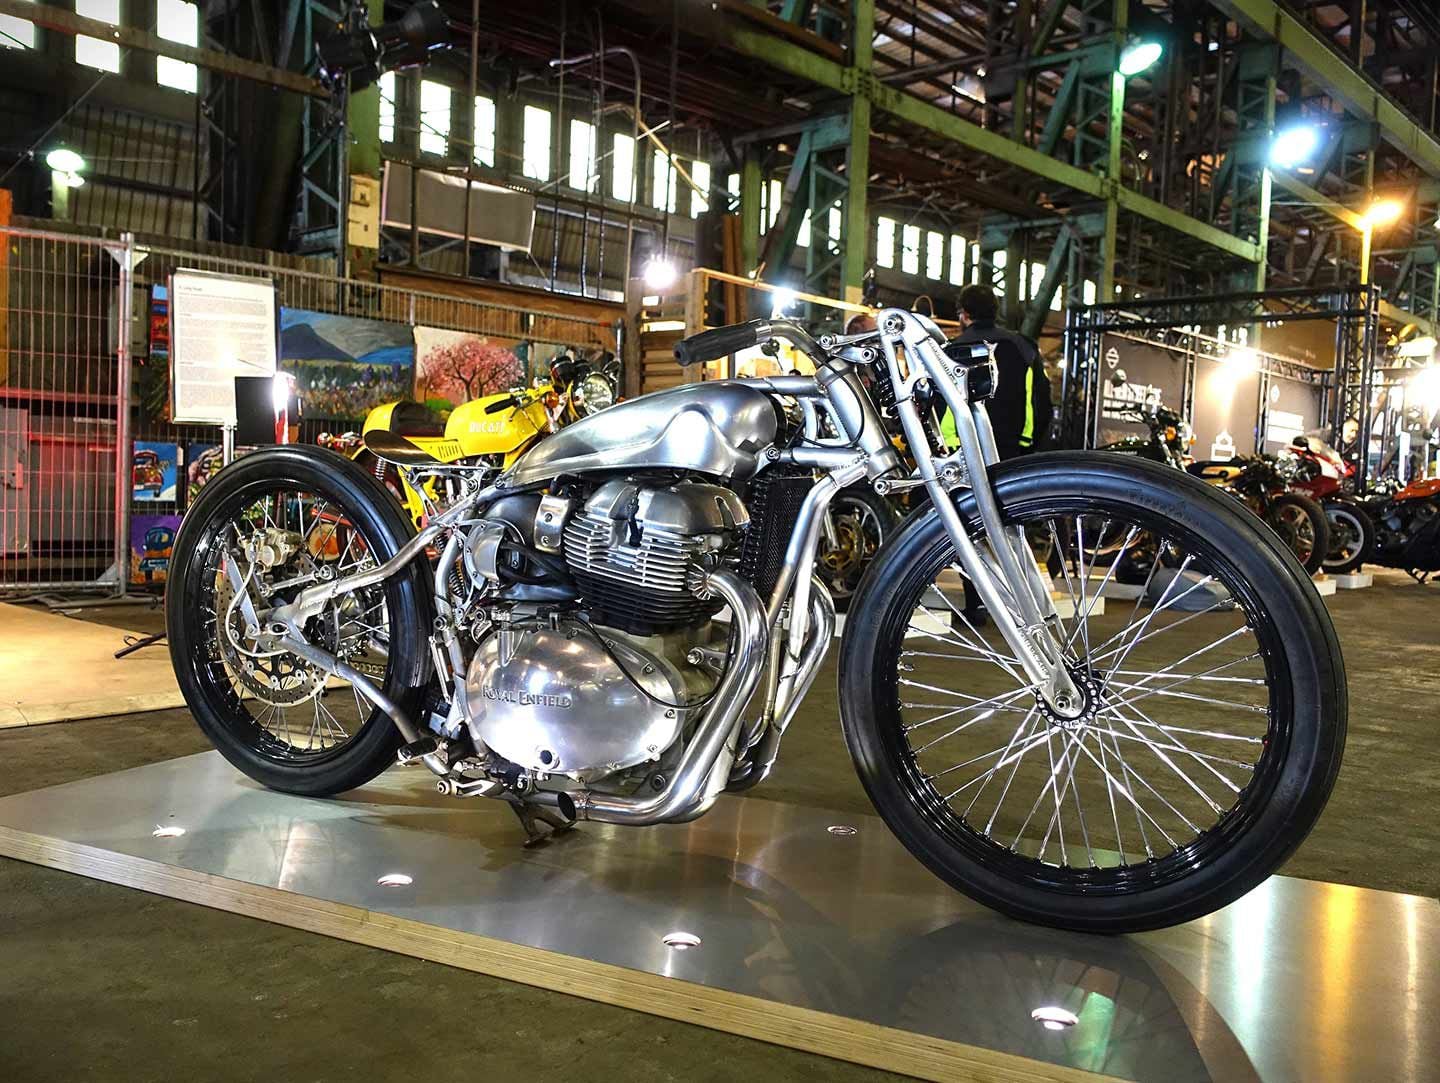 Show sponsor Royal Enfield gathered a slew of customs from around the world in its area, and this build called “Kamala,” also based on the brand’s 650 platform, was rendered by master metal magician Cristian Sosa.